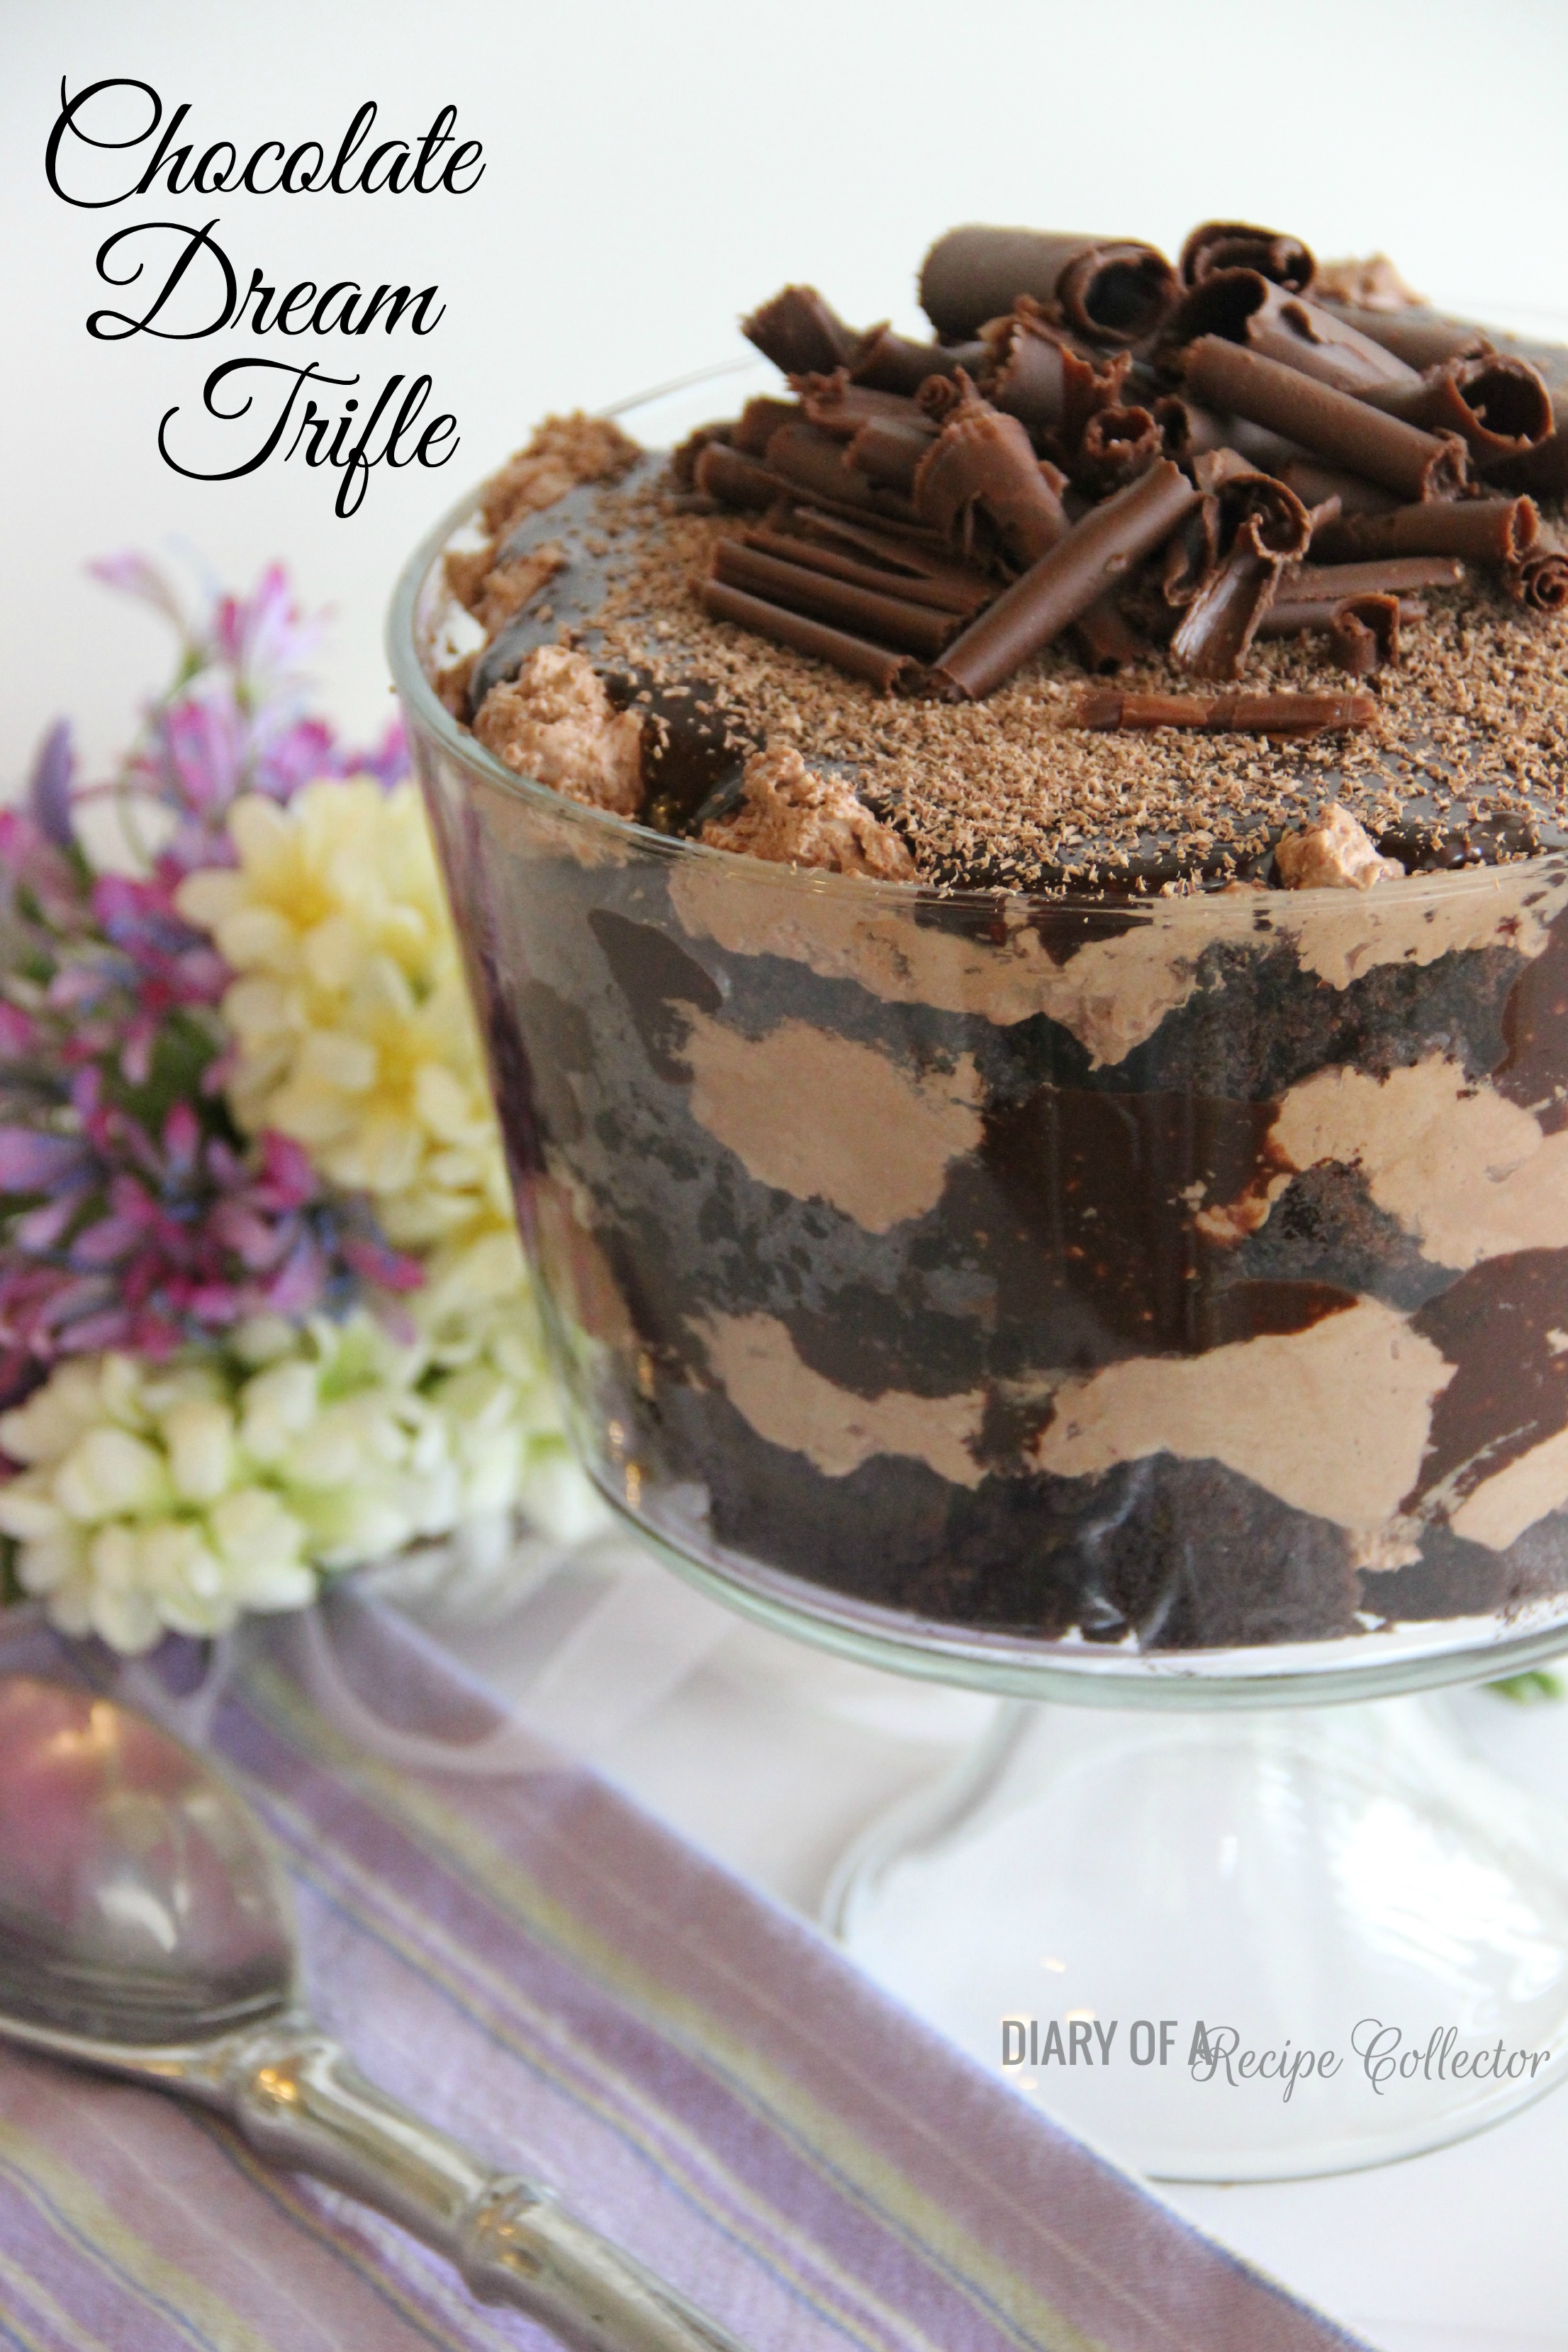 Chocolate Dream Trifle - Diary of A Recipe Collector